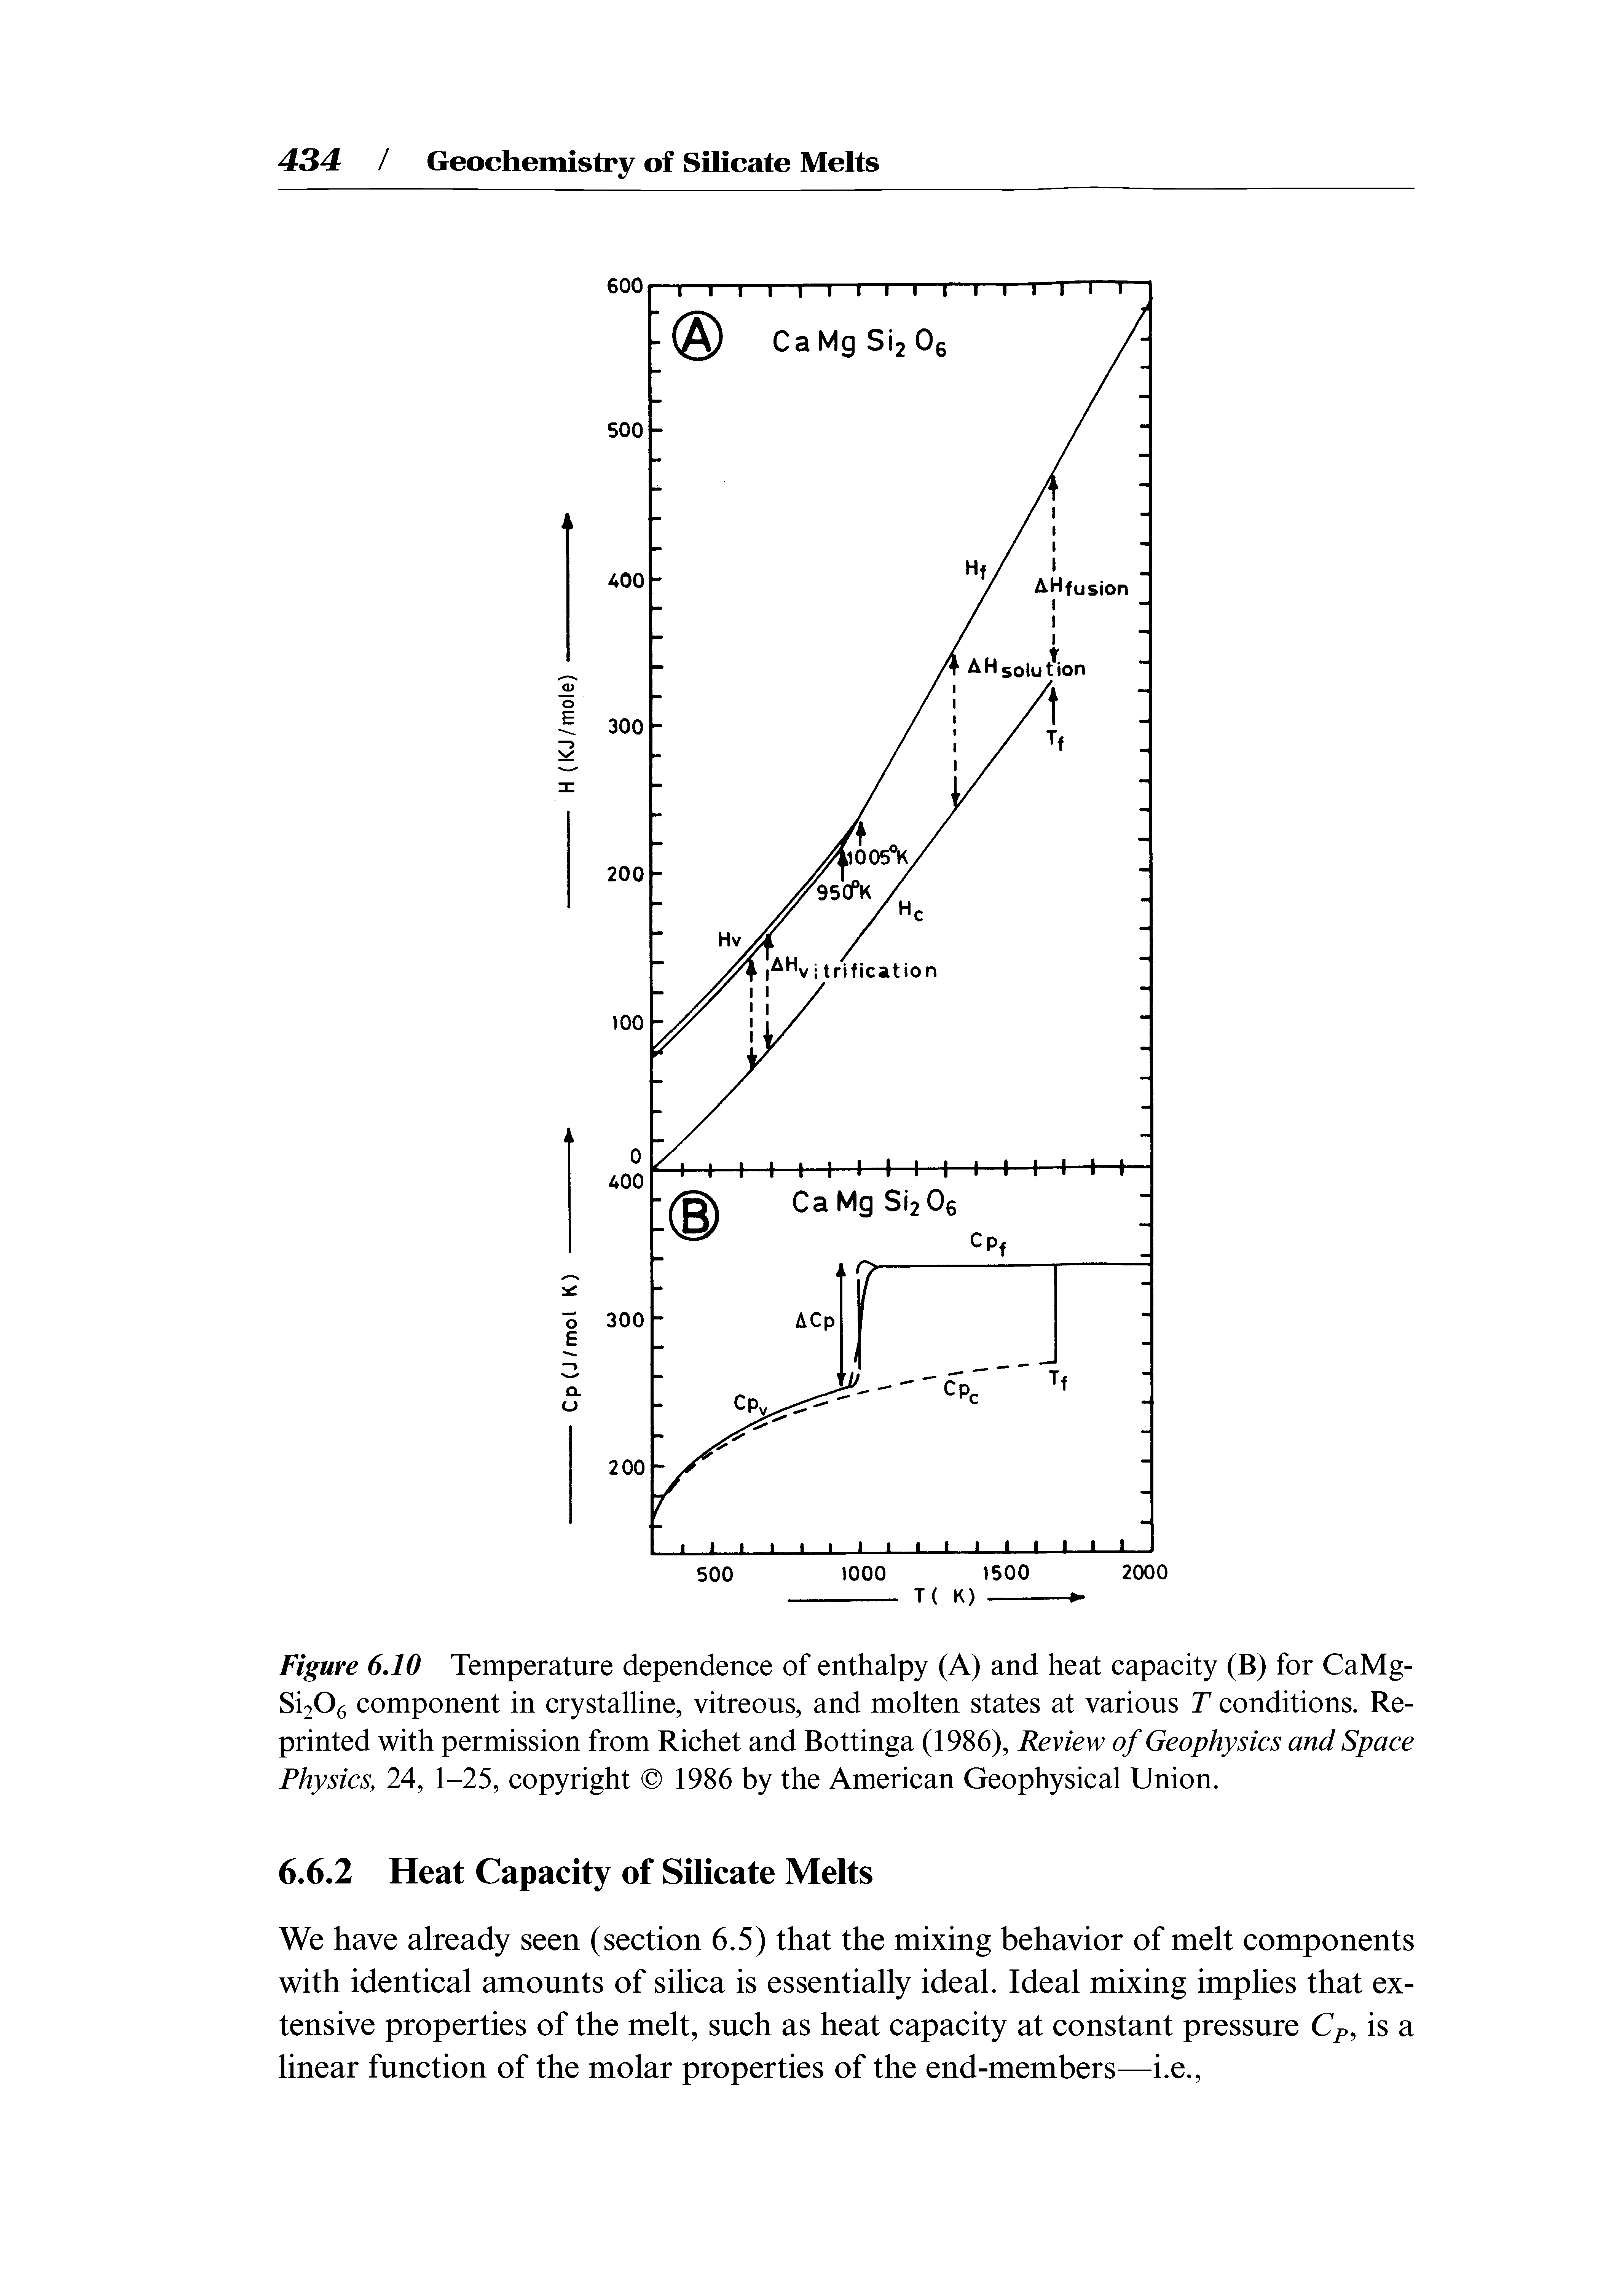 Figure 6AO Temperature dependence of enthalpy (A) and heat capacity (B) for CaMg-Si206 component in crystalline, vitreous, and molten states at various T conditions. Reprinted with permission from Richet and Bottinga (1986), Review of Geophysics and Space Physics, 24, 1-25, copyright 1986 by the American Geophysical Union.